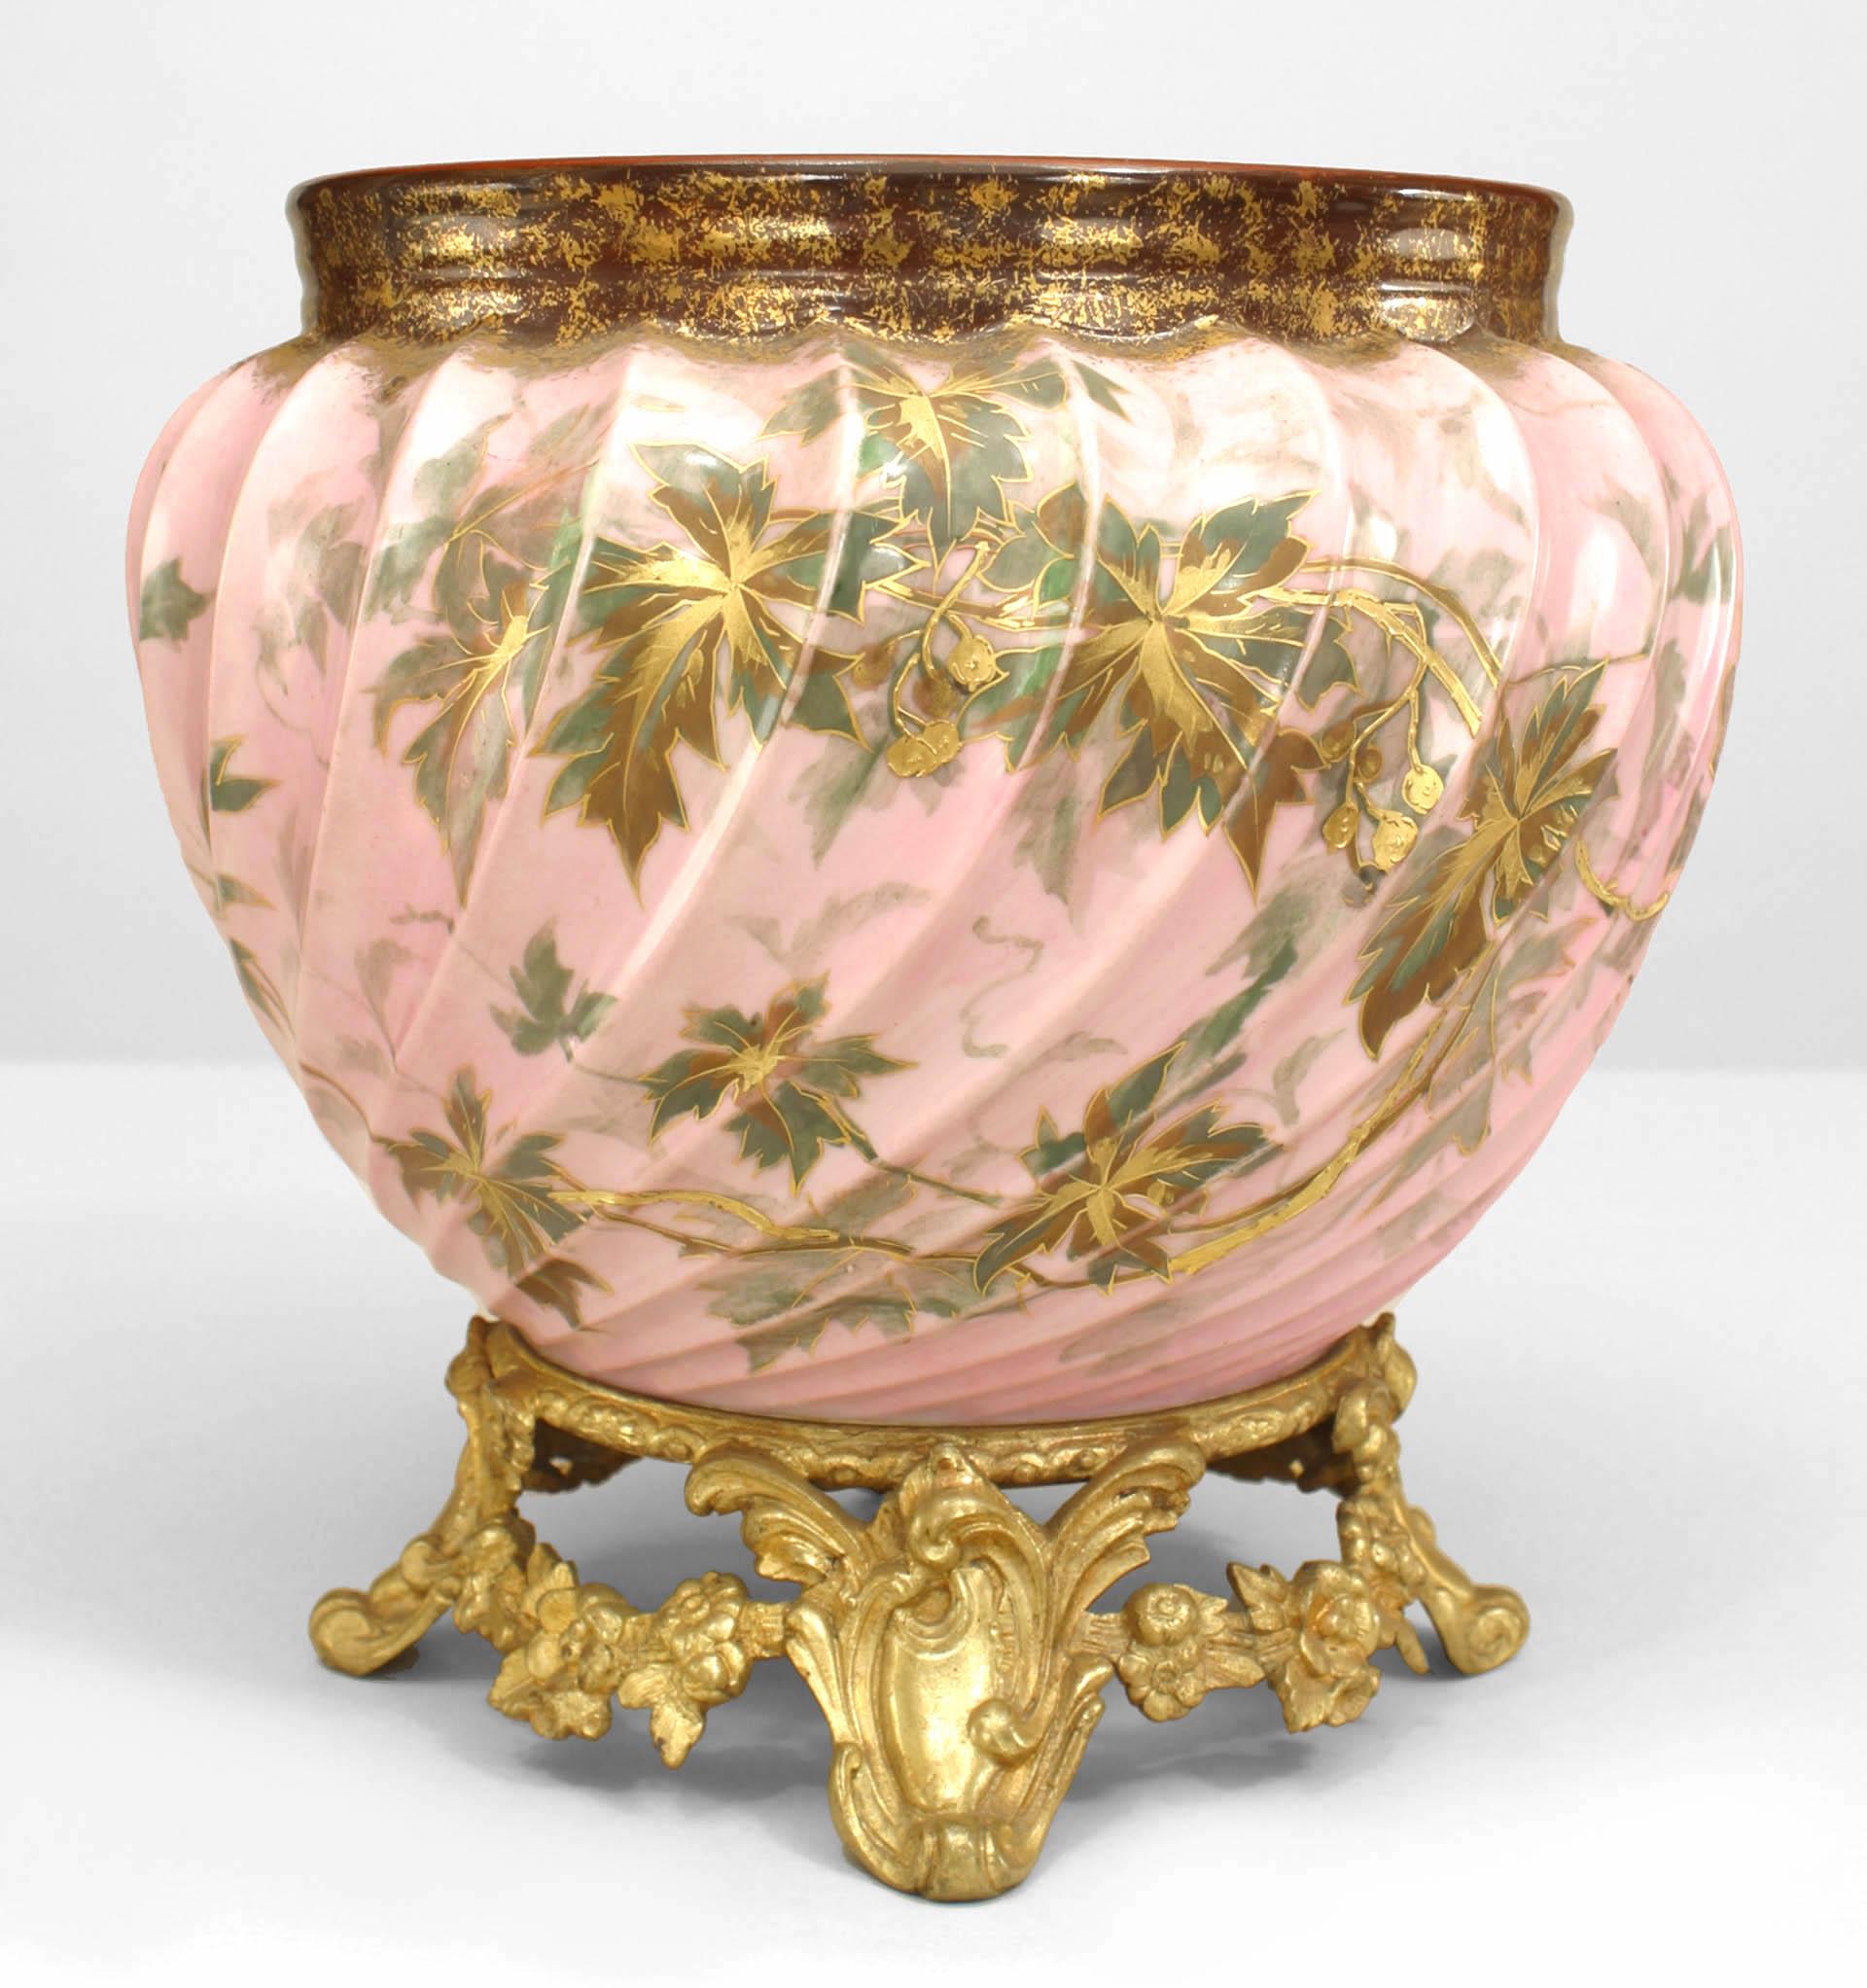 Pair of French Victorian-style (19/20th Century) pink and white porcelain floral fluted design cachepots with gilt bronze base. Signed G.D.& Cie Limoges (PRICED AS Pair)
